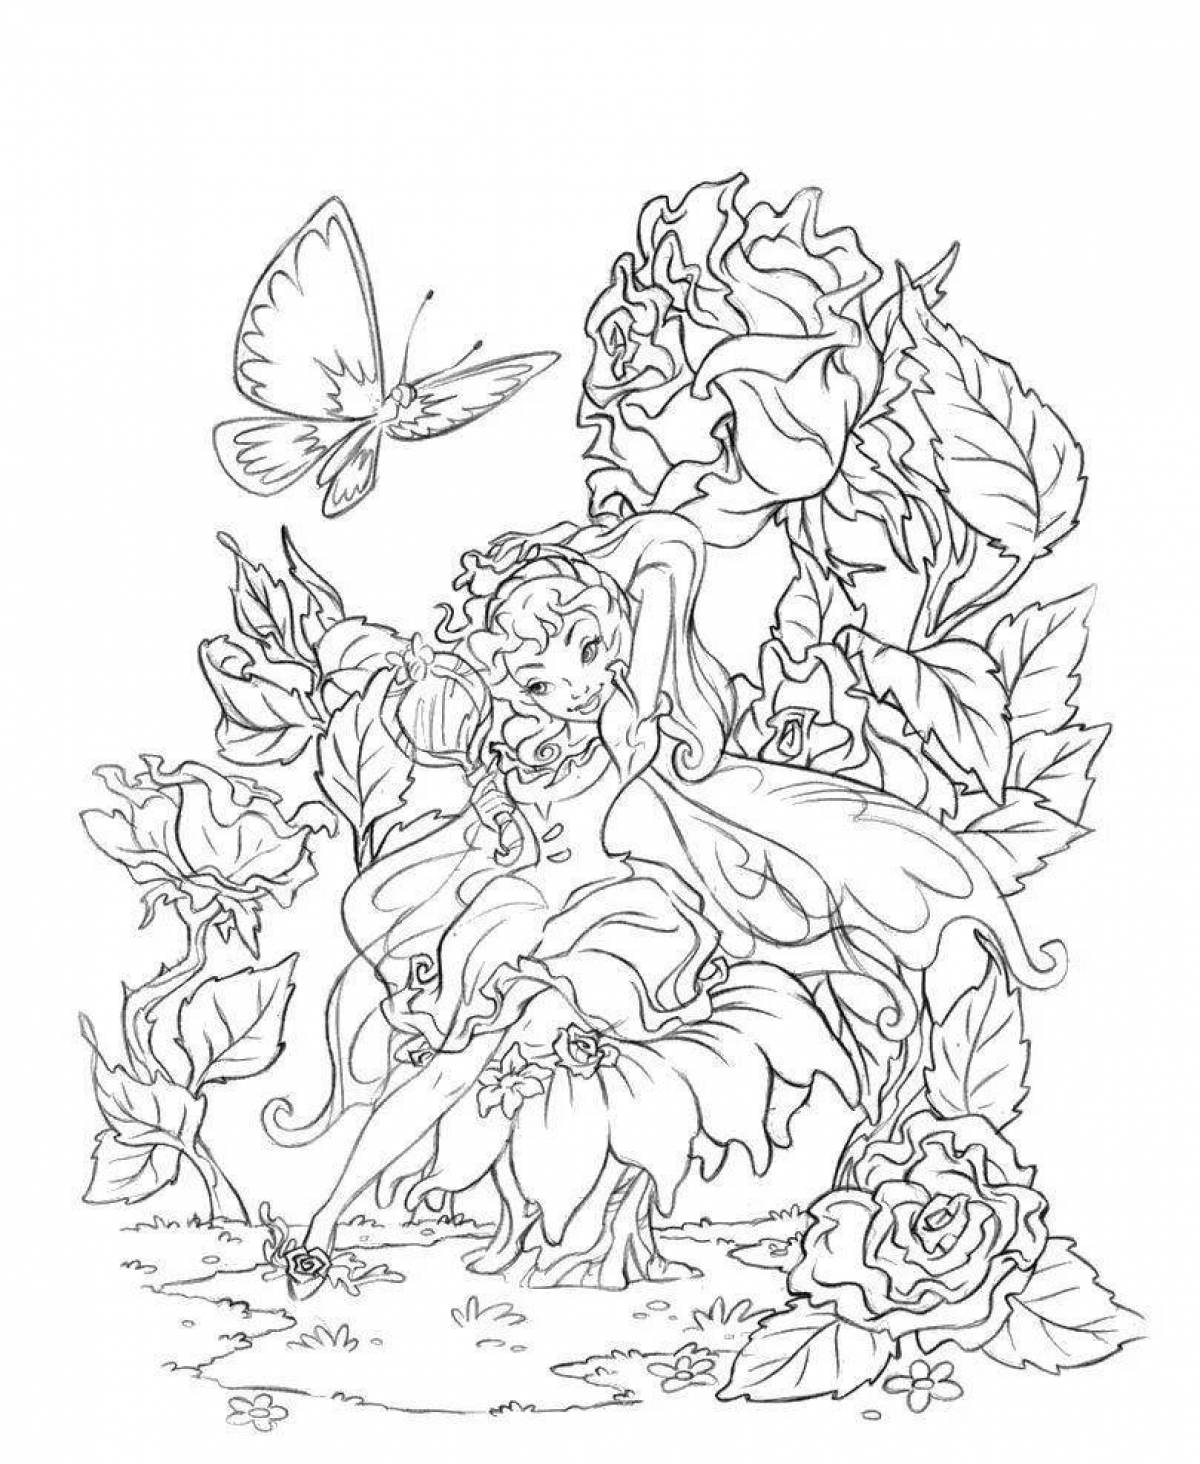 Soulful fairy tale coloring book